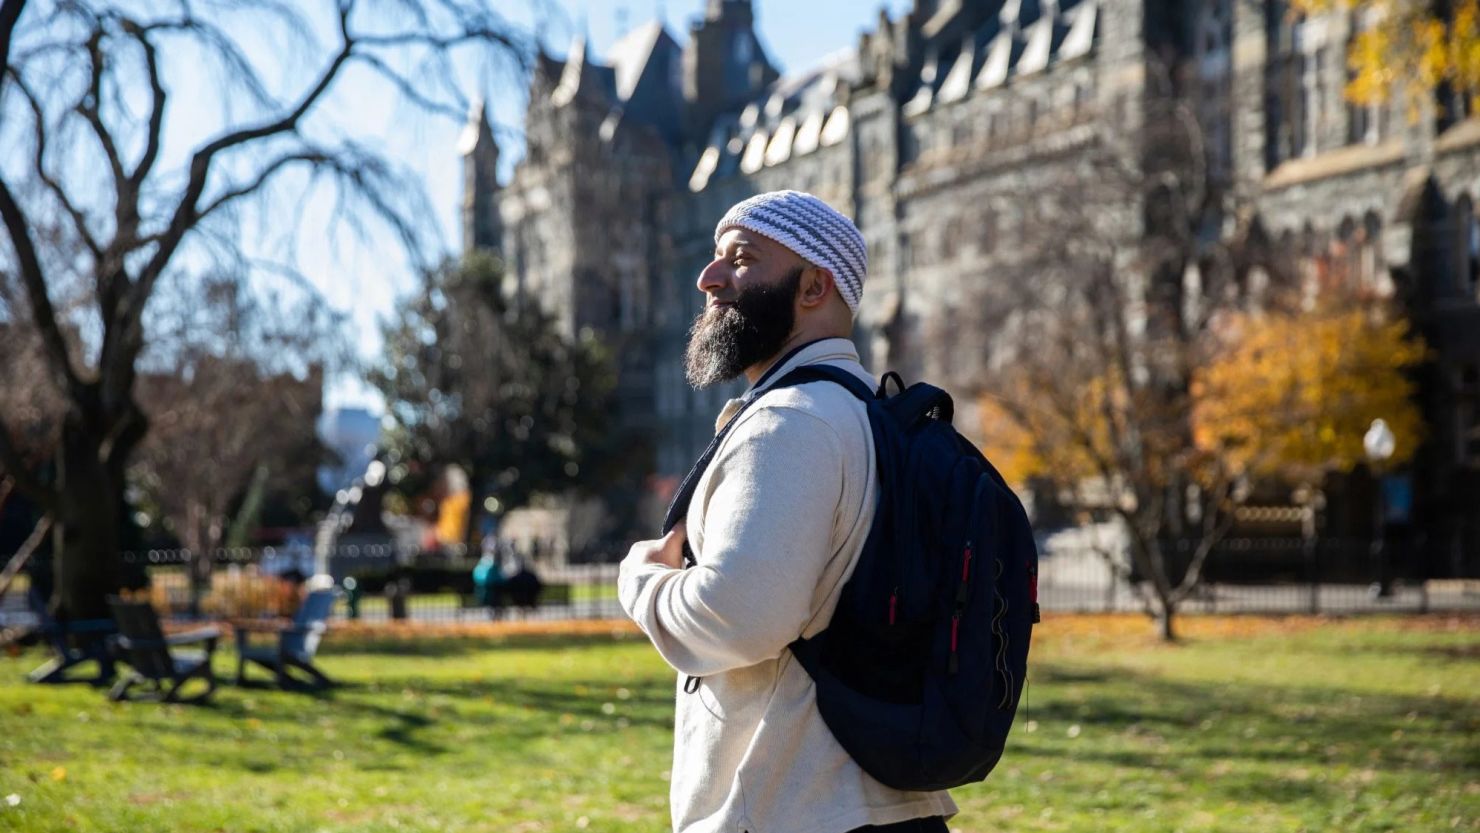 Adnan Syed has been hired by Georgetown to work on its Prisons and Justice Initiative.